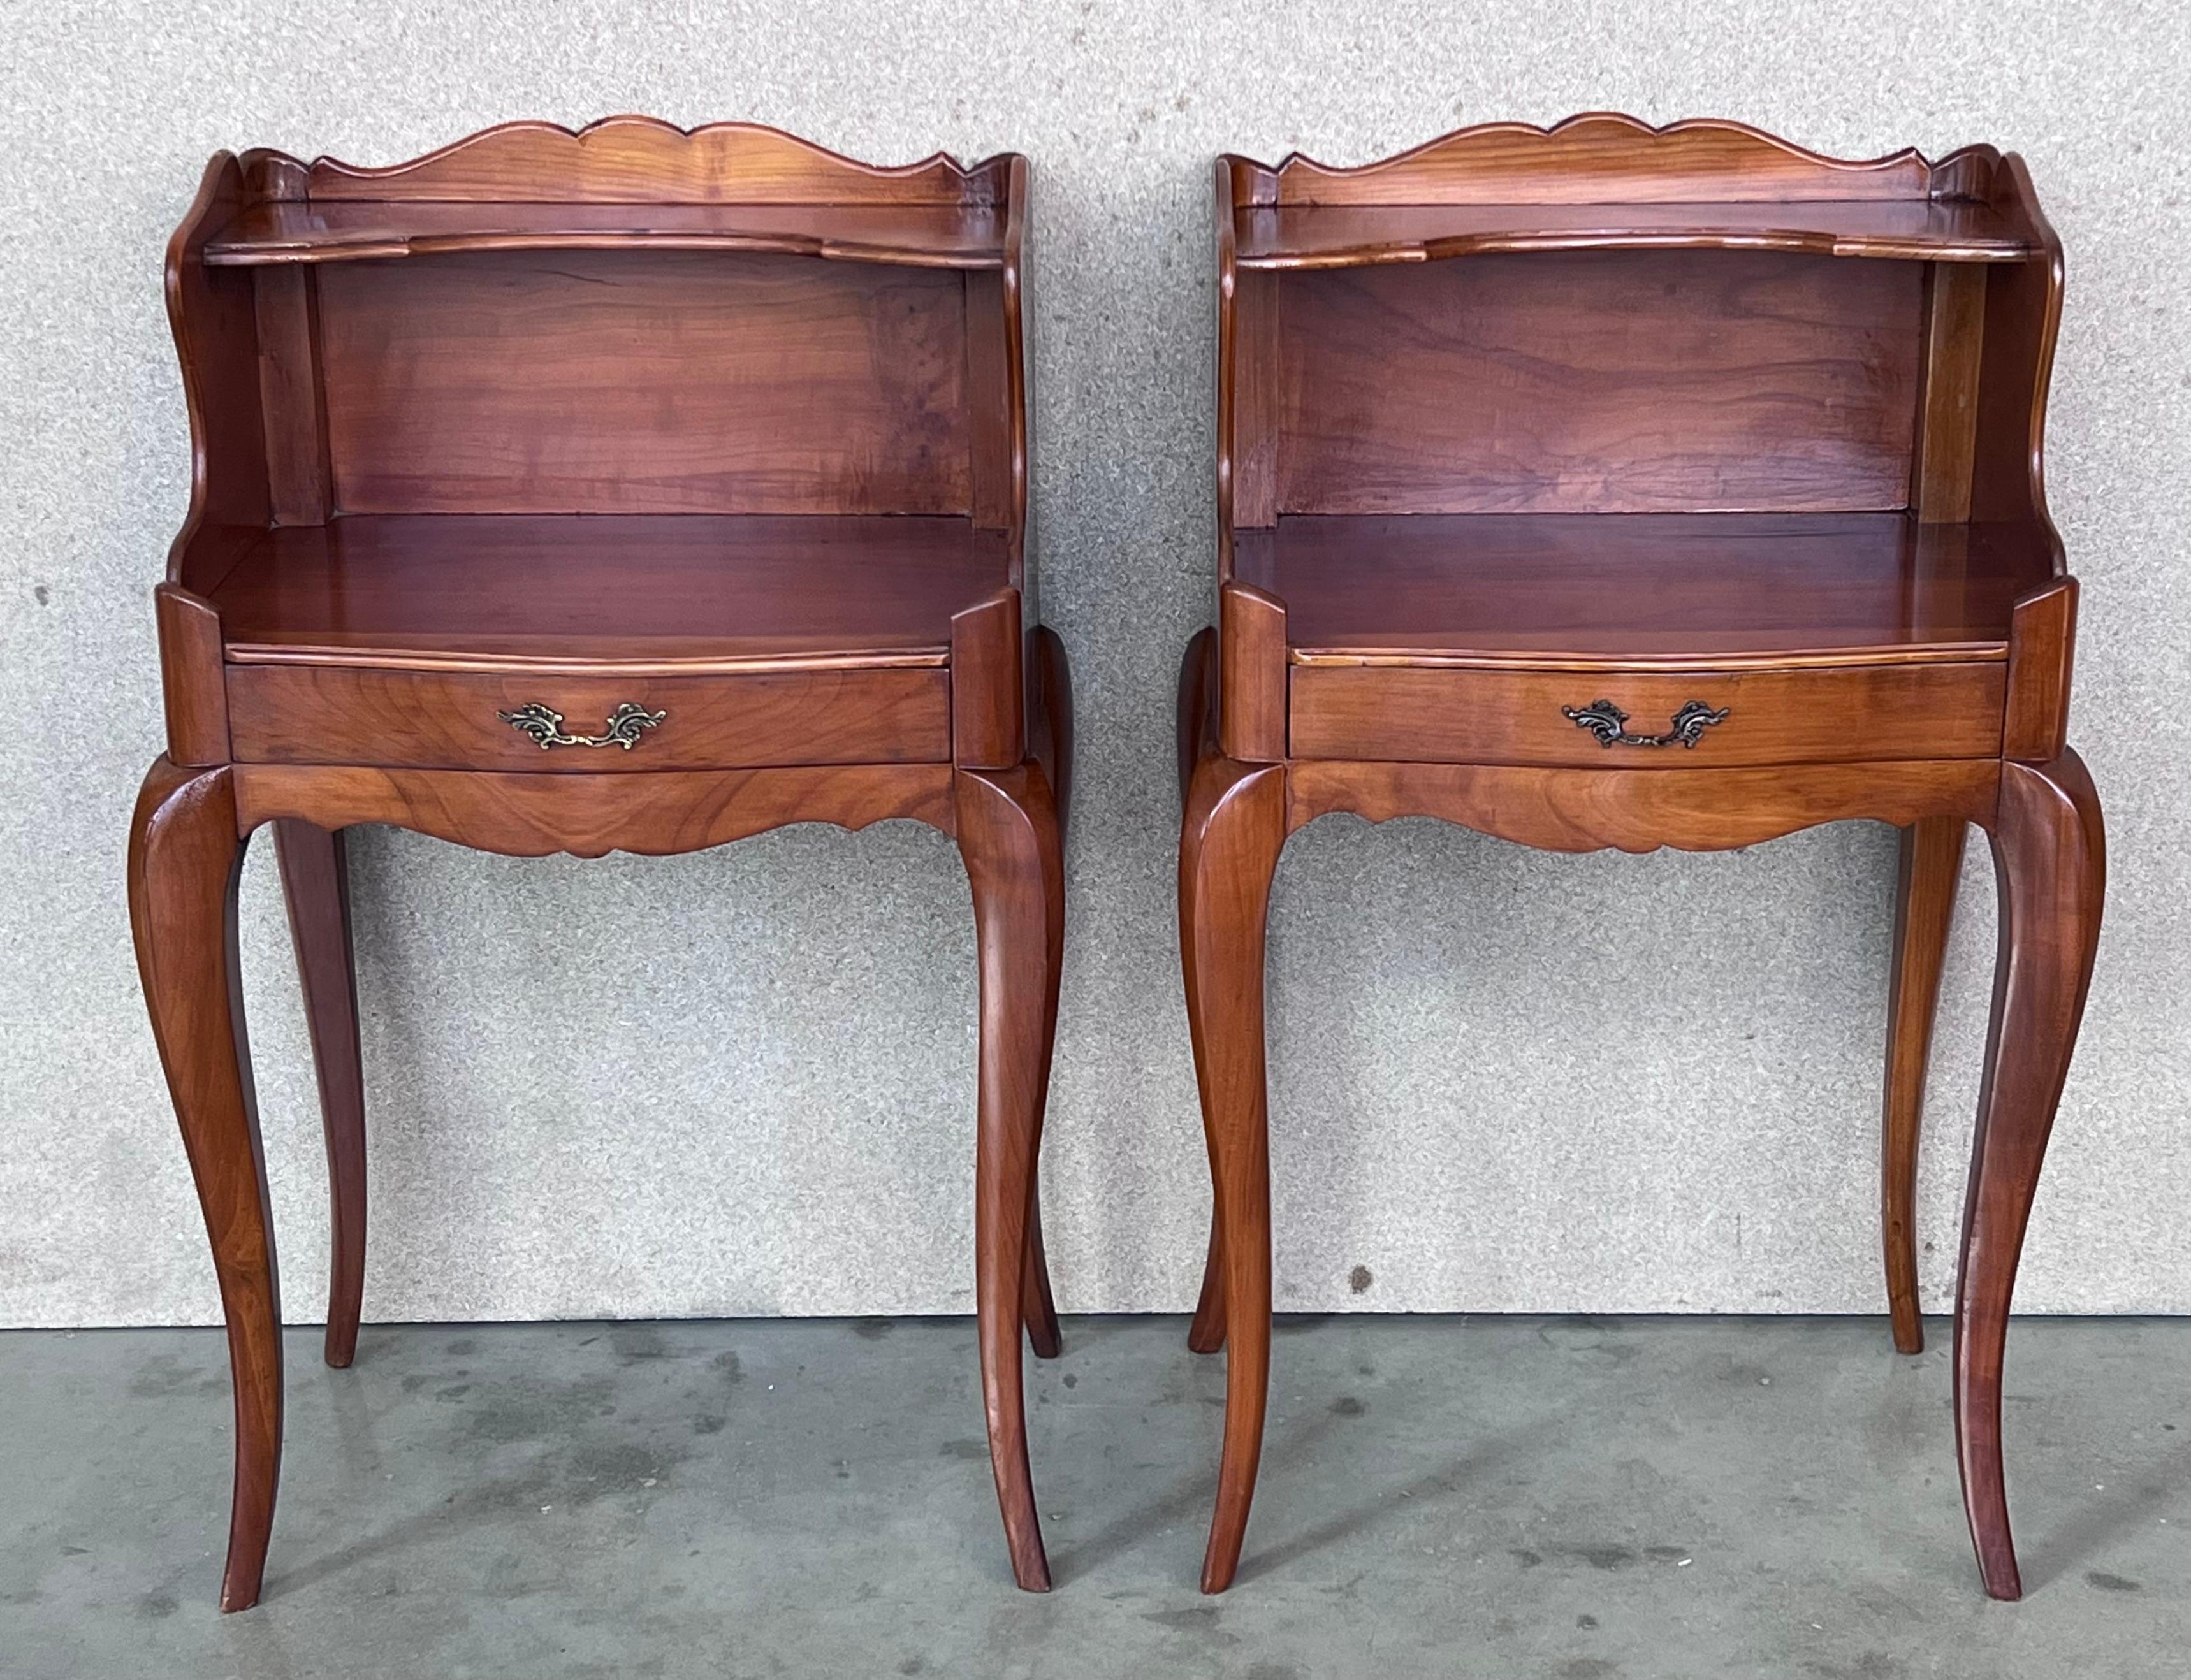 A pretty pair of French one drawer nightstands with open shelf , circa 1910.
Pair of French Louis XV style walnut bedside tables from the early 20th century. This pair of French 'tables de chevet' was created in the early years of the 20th century,